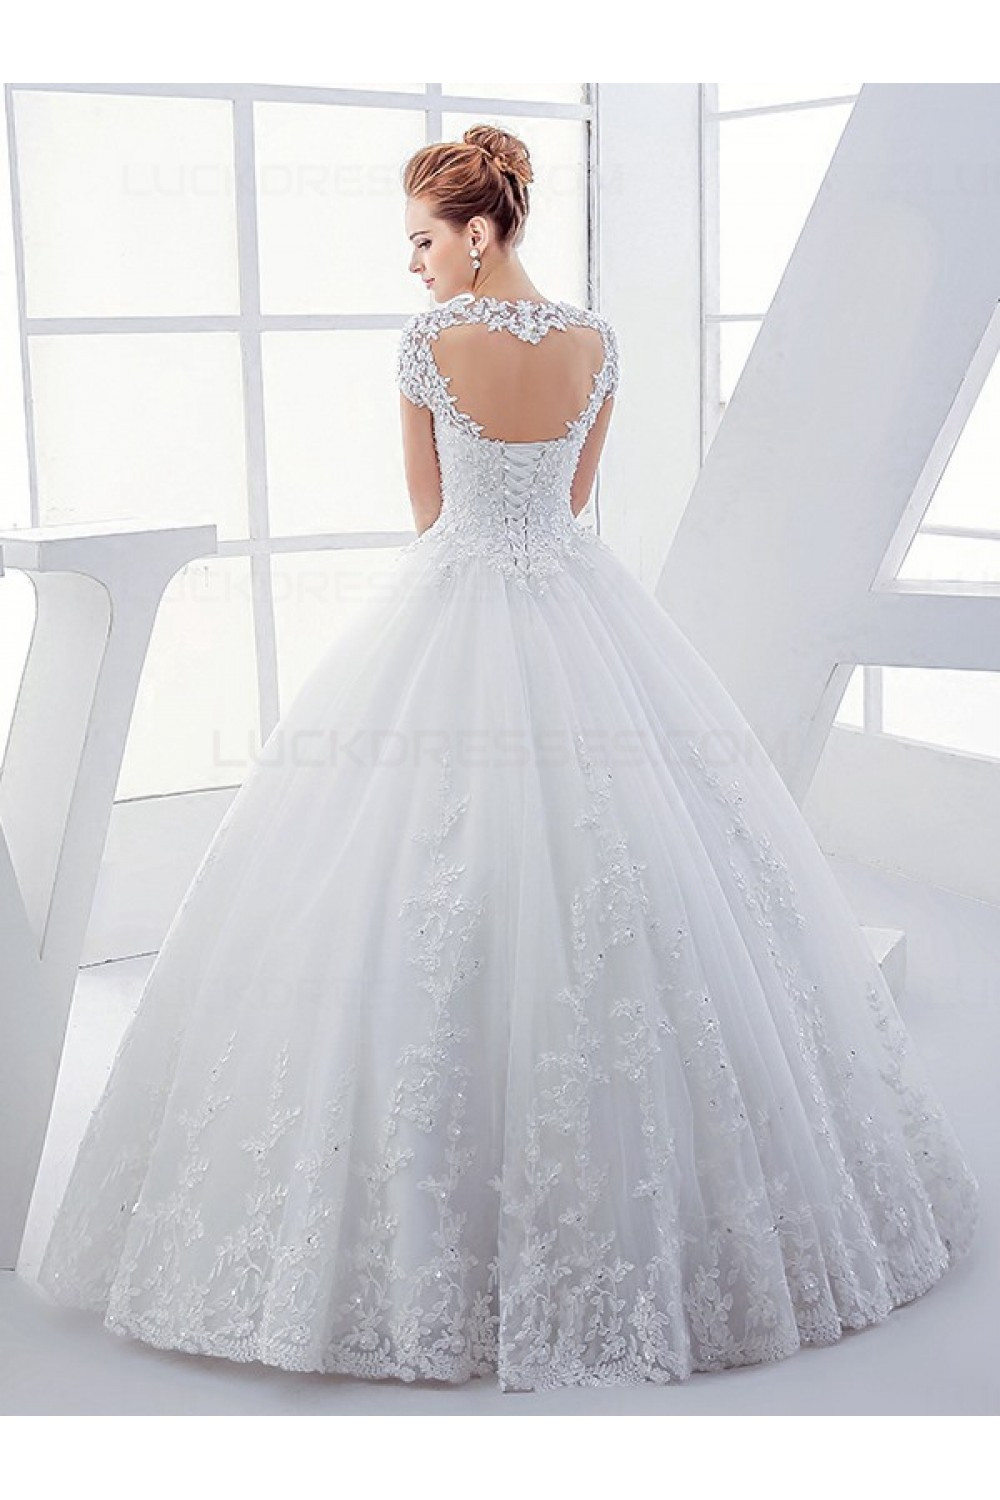 Lace Ball Gown Wedding Dresses
 Lace Ball Gown Keyhole Back Sparkly Wedding Dresses Bridal